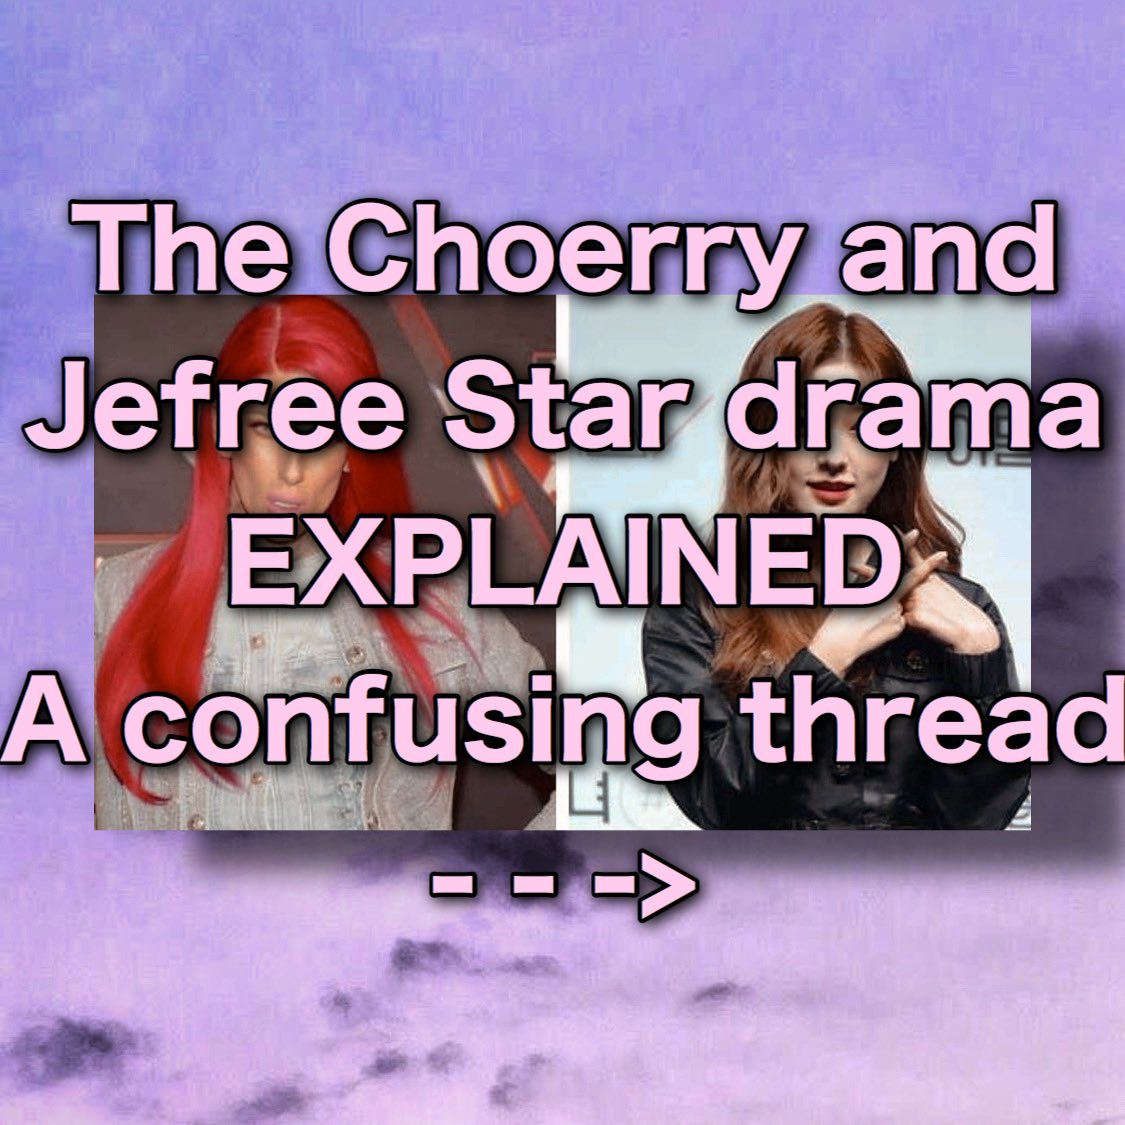 I made a thread about the whole thing for everybody who is confused
#JeffreeStarApologizeToChoerry 
#jefreestarisoverparty 
#jefreestarisoverparty 
#LOONA  #Jefreestar #CHOERRY